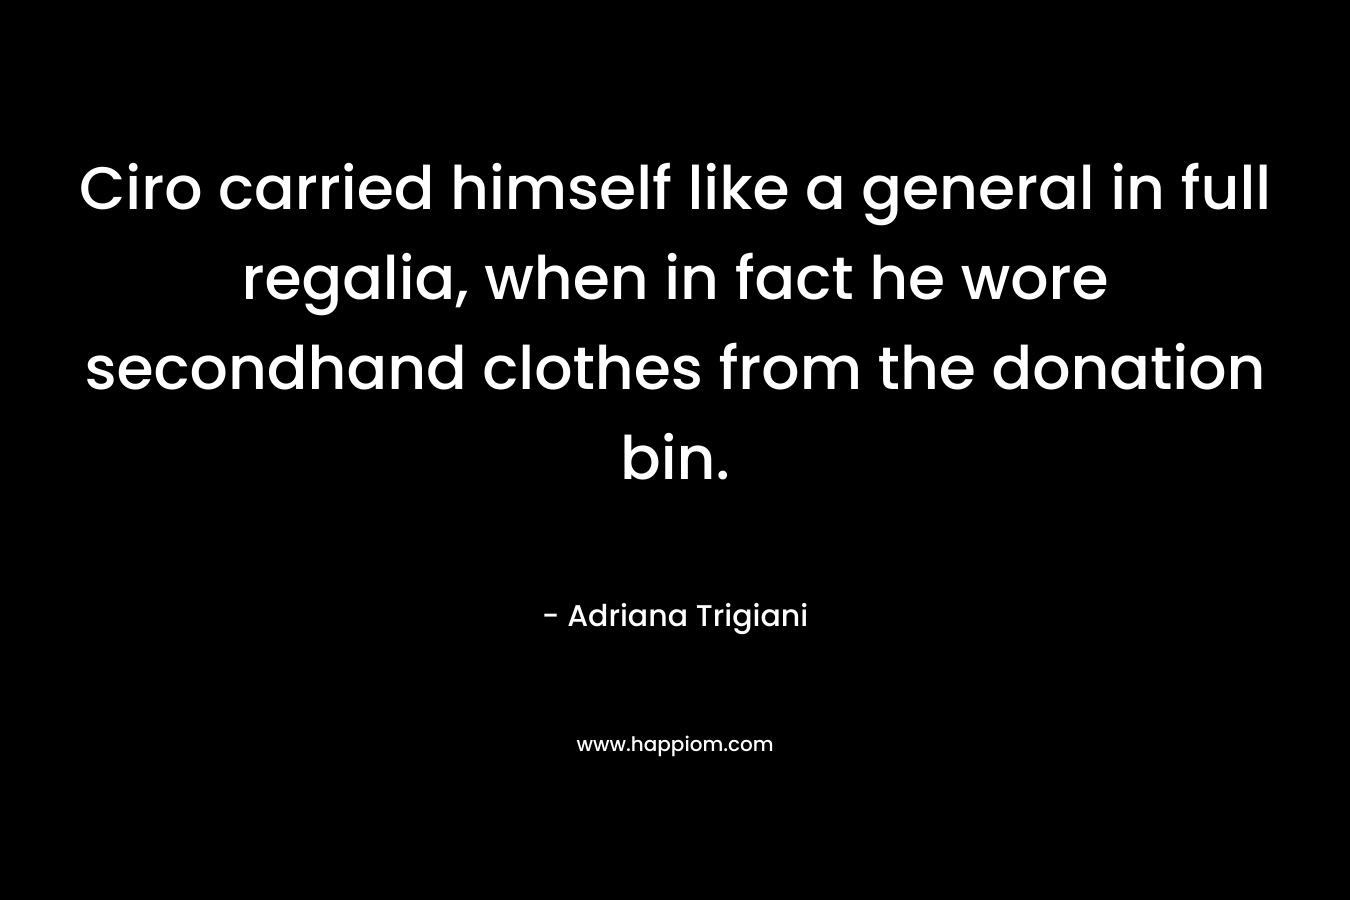 Ciro carried himself like a general in full regalia, when in fact he wore secondhand clothes from the donation bin. – Adriana Trigiani